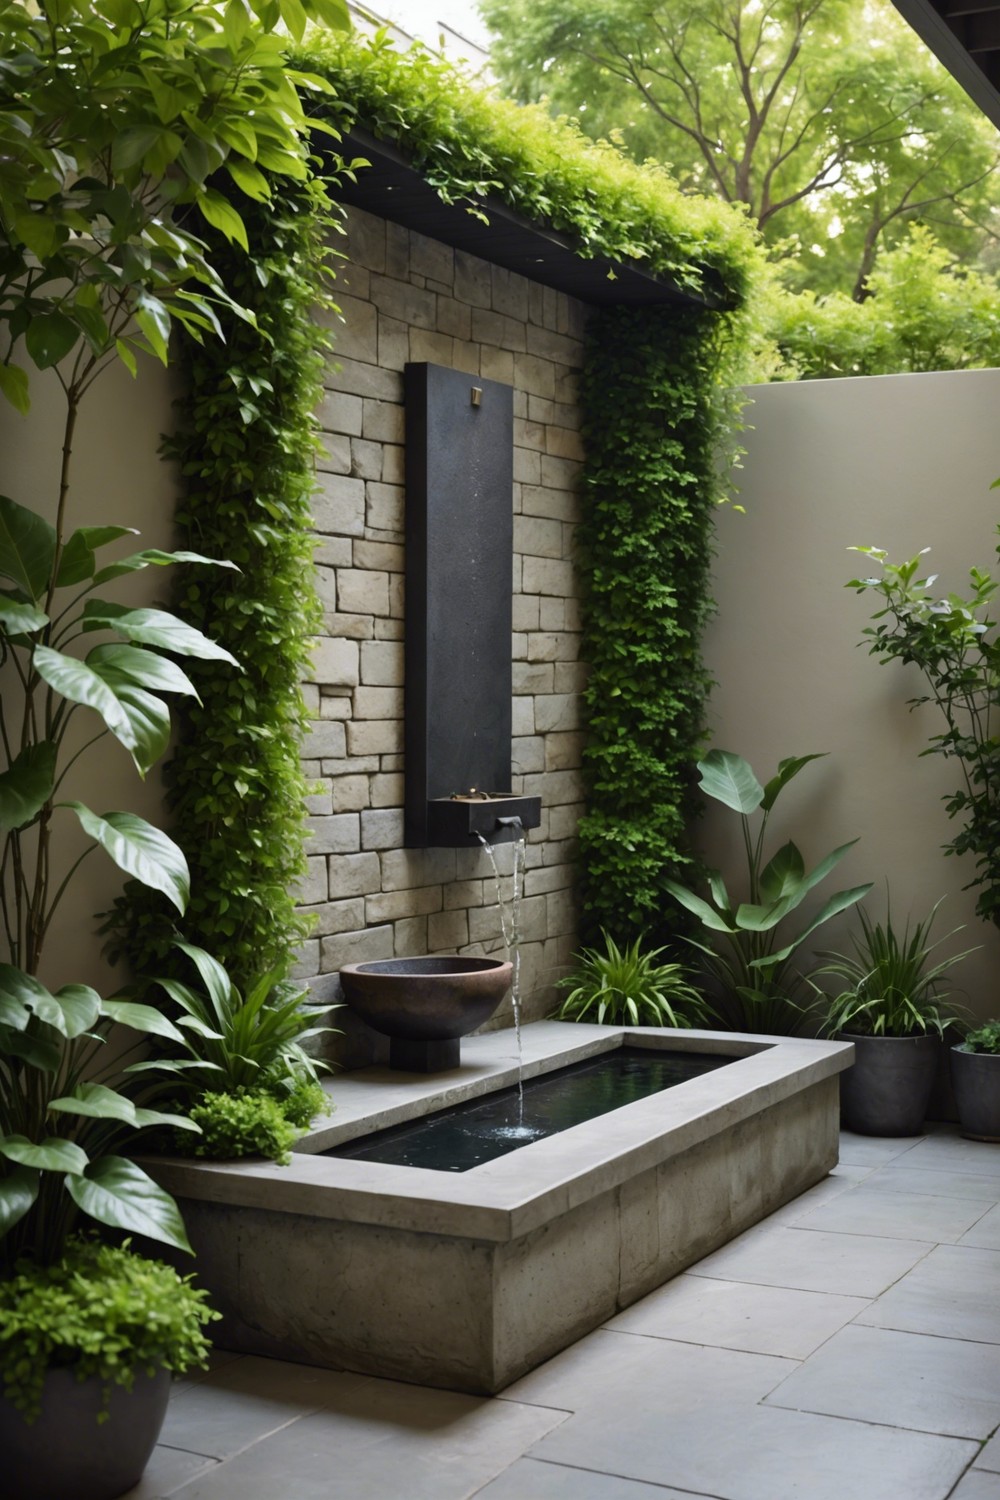 Small-Scale Water Feature